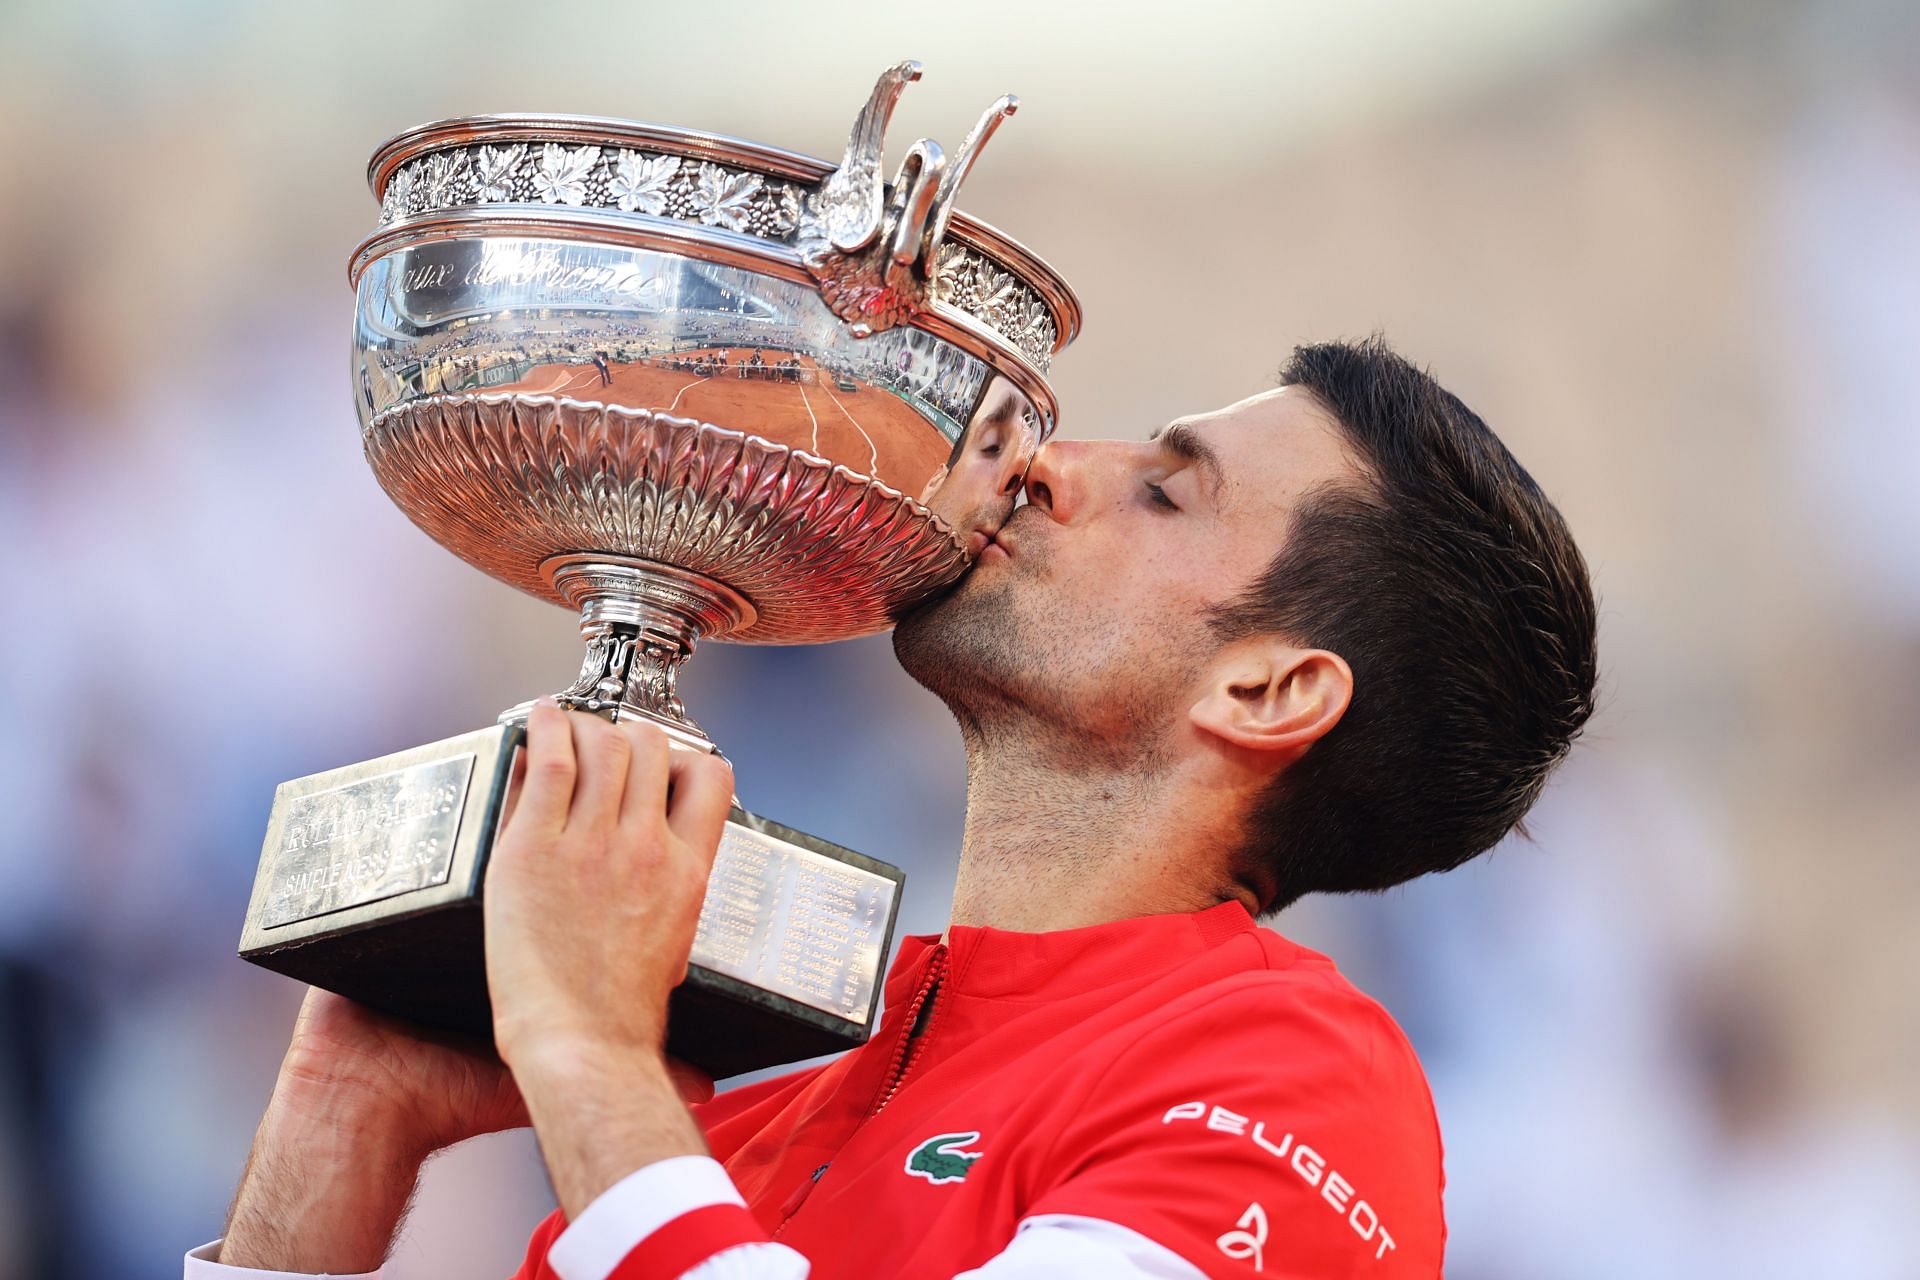 Novak Djokovic will now look to defend his French Open title starting next week